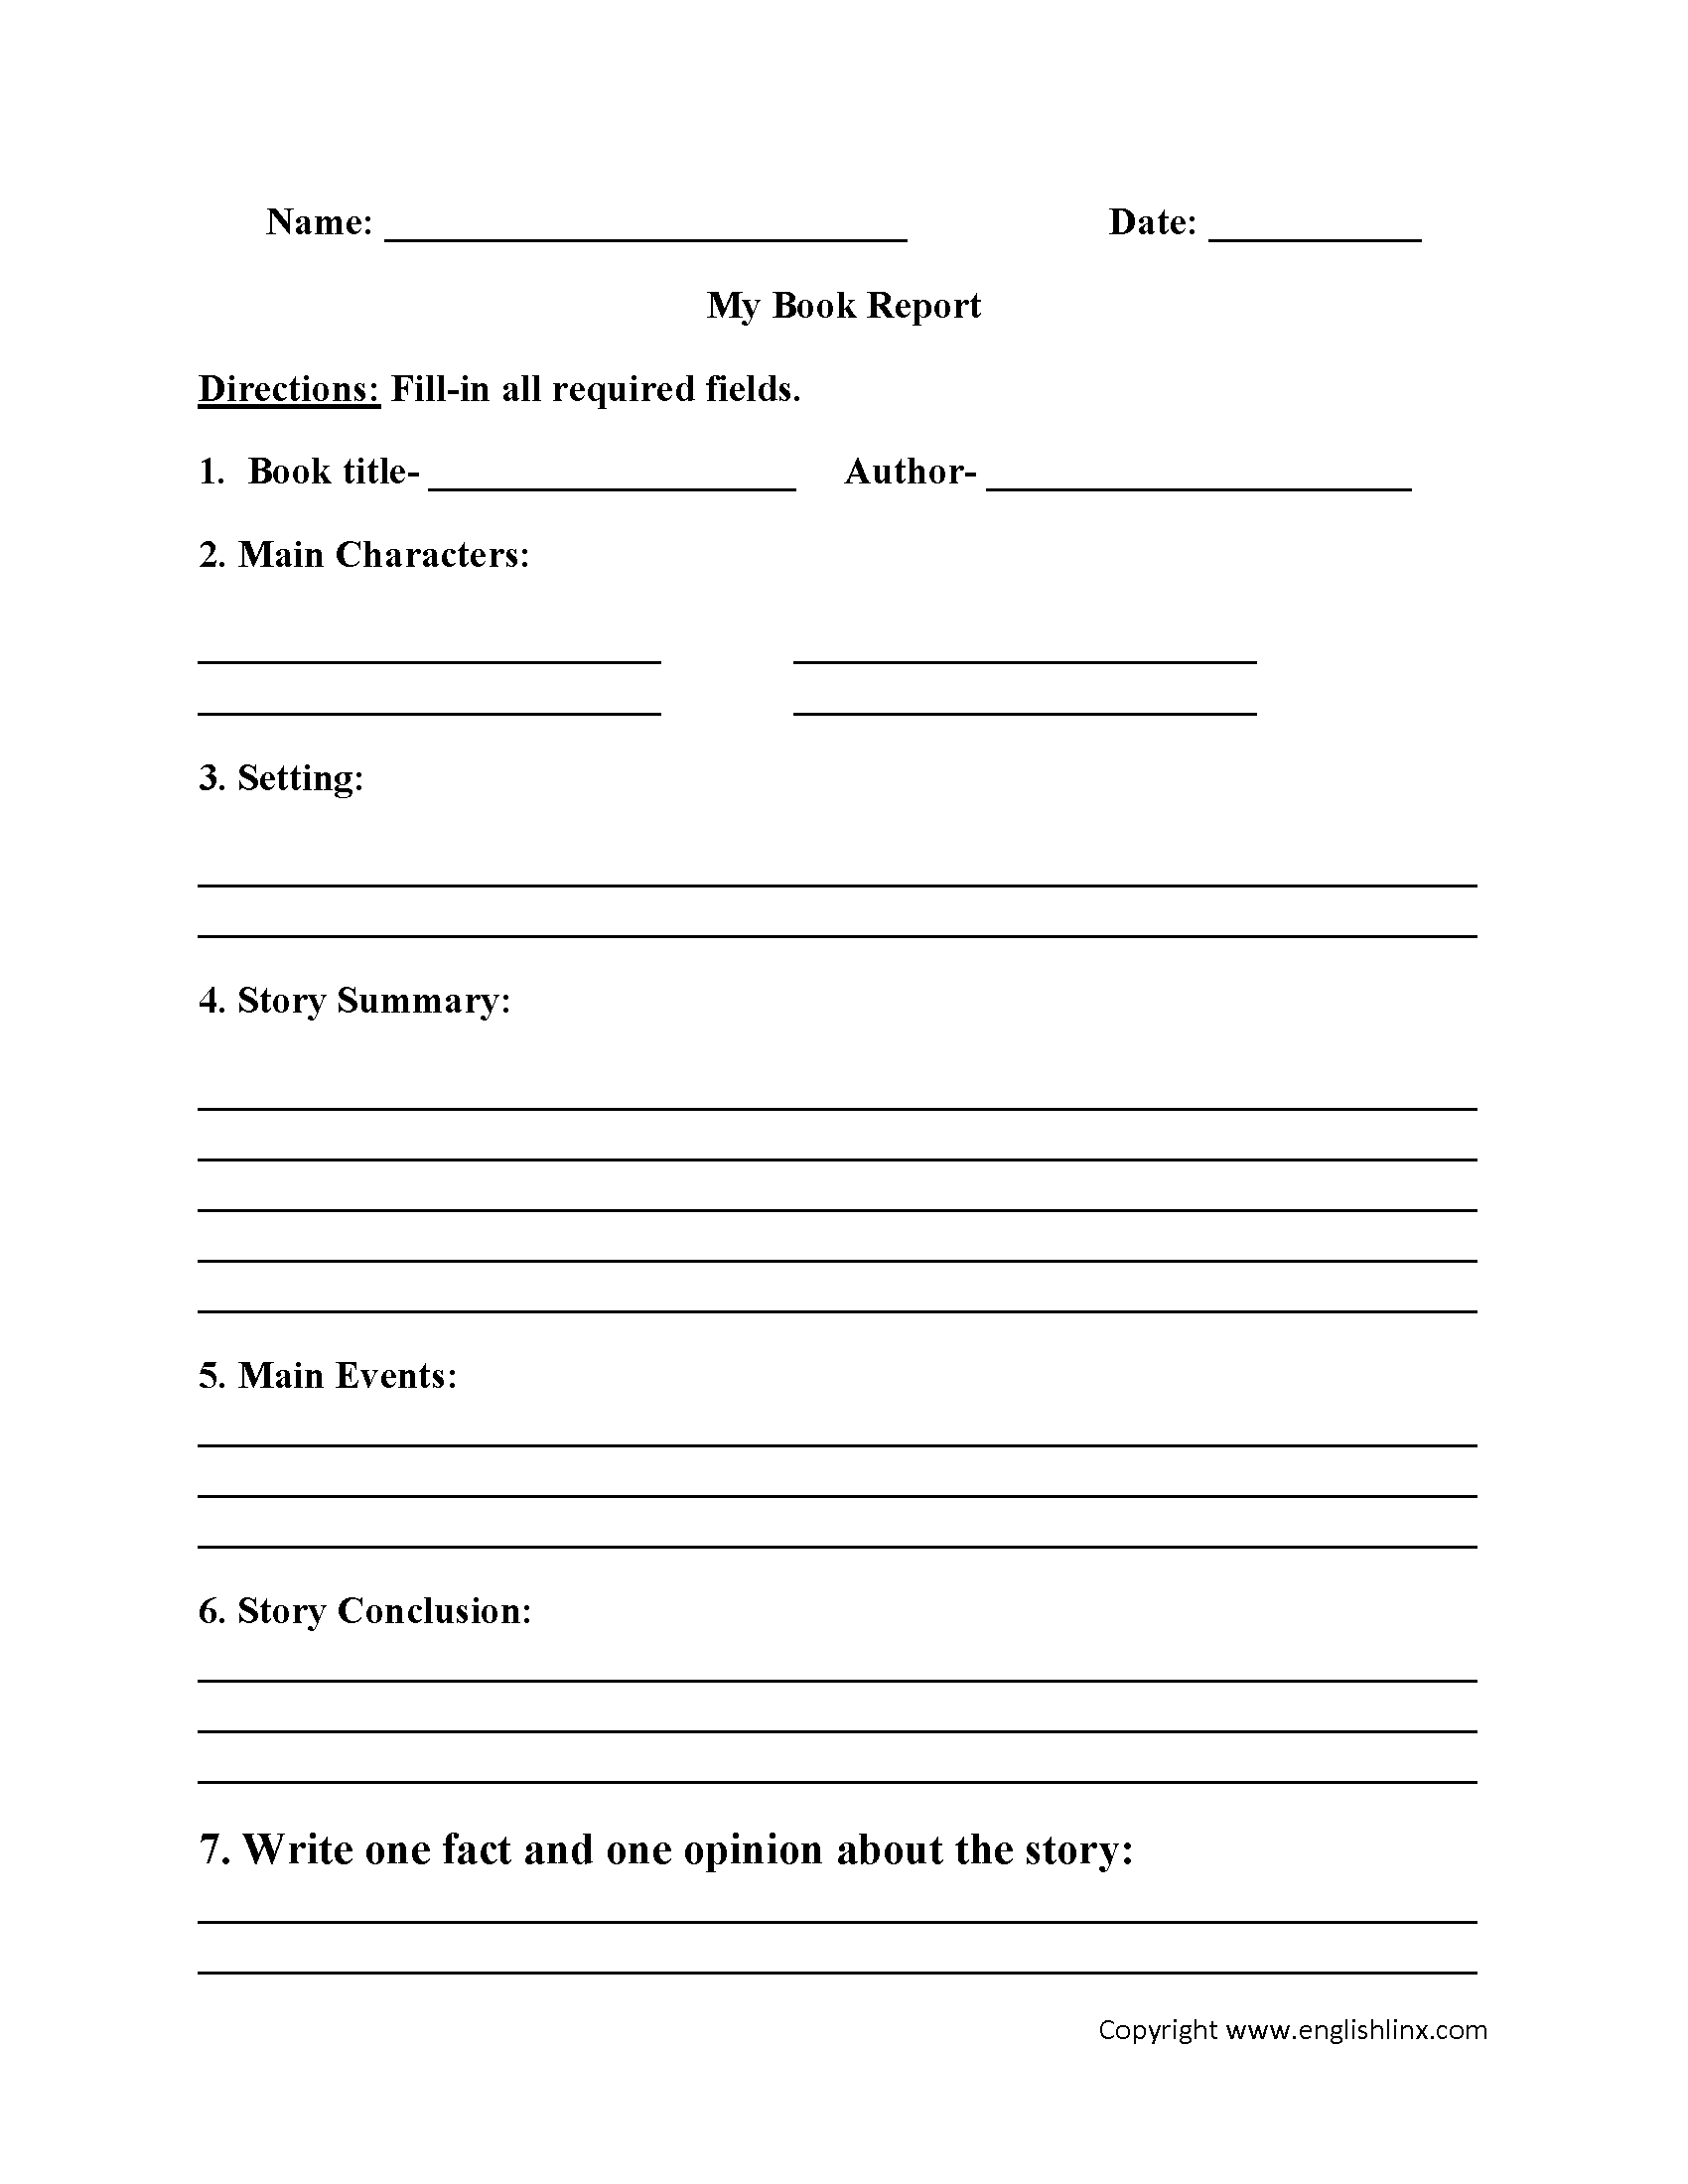 Englishlinx | Book Report Worksheets Throughout Book Report Template High School